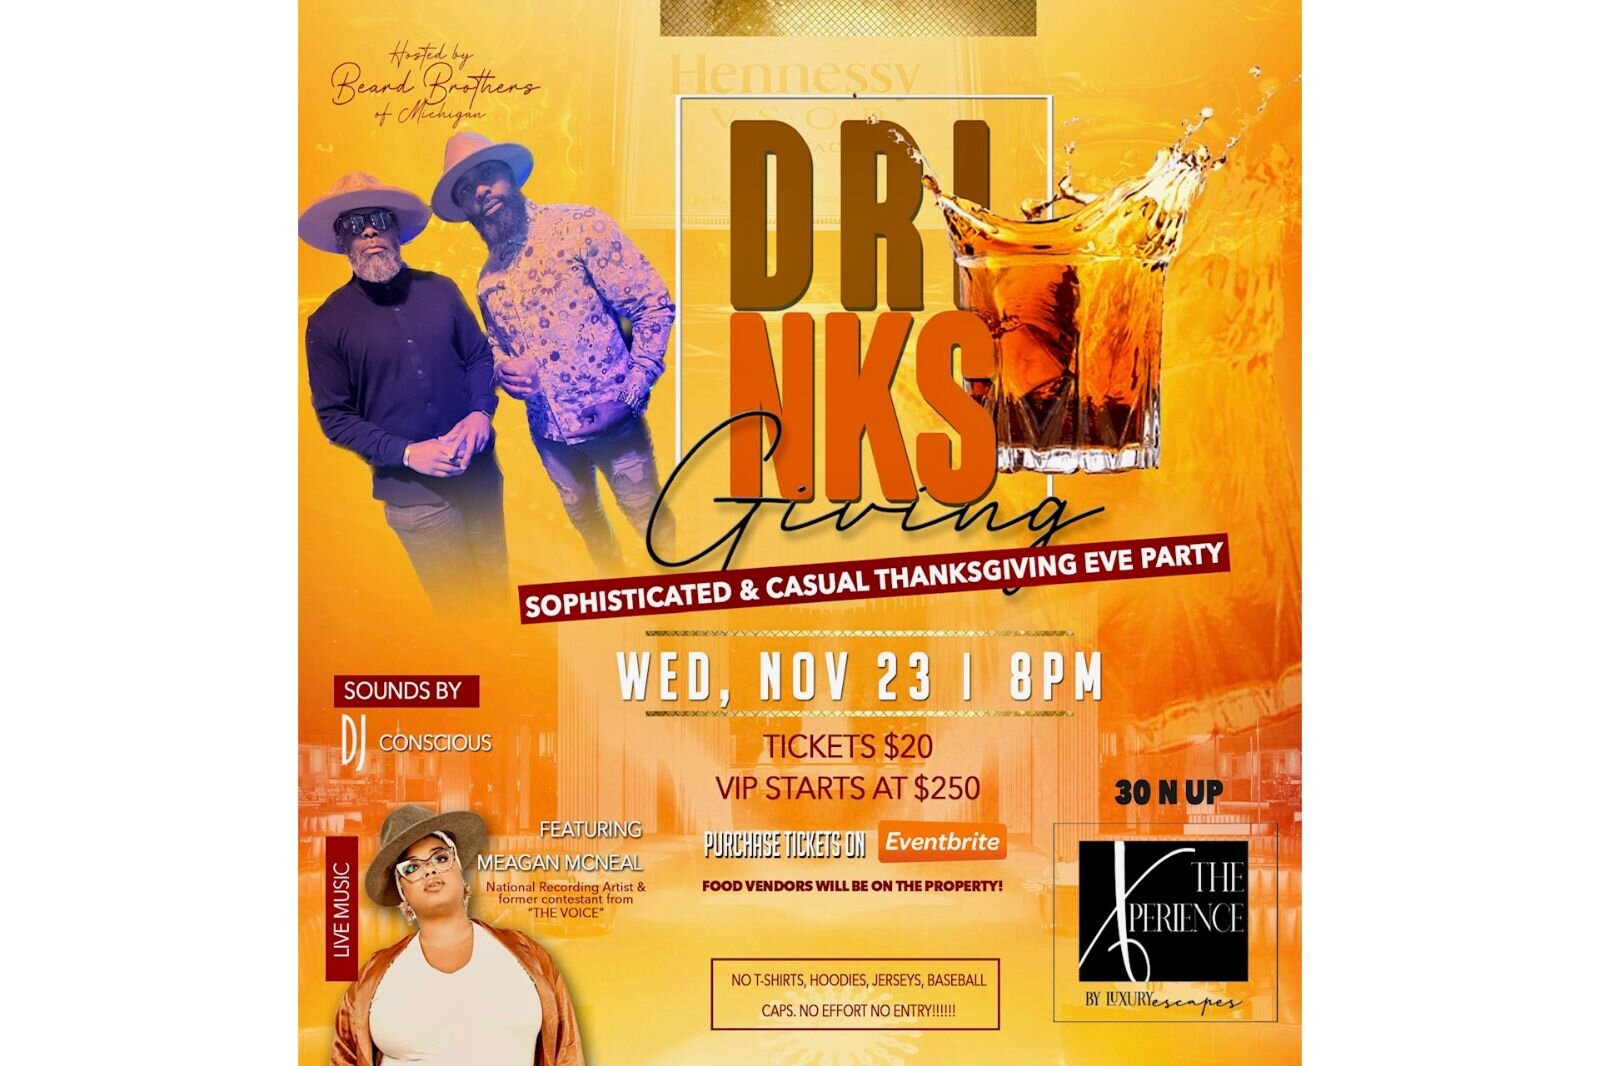 This flier shows a pre-Thanksgiving event that will be hosted at The Xperience.